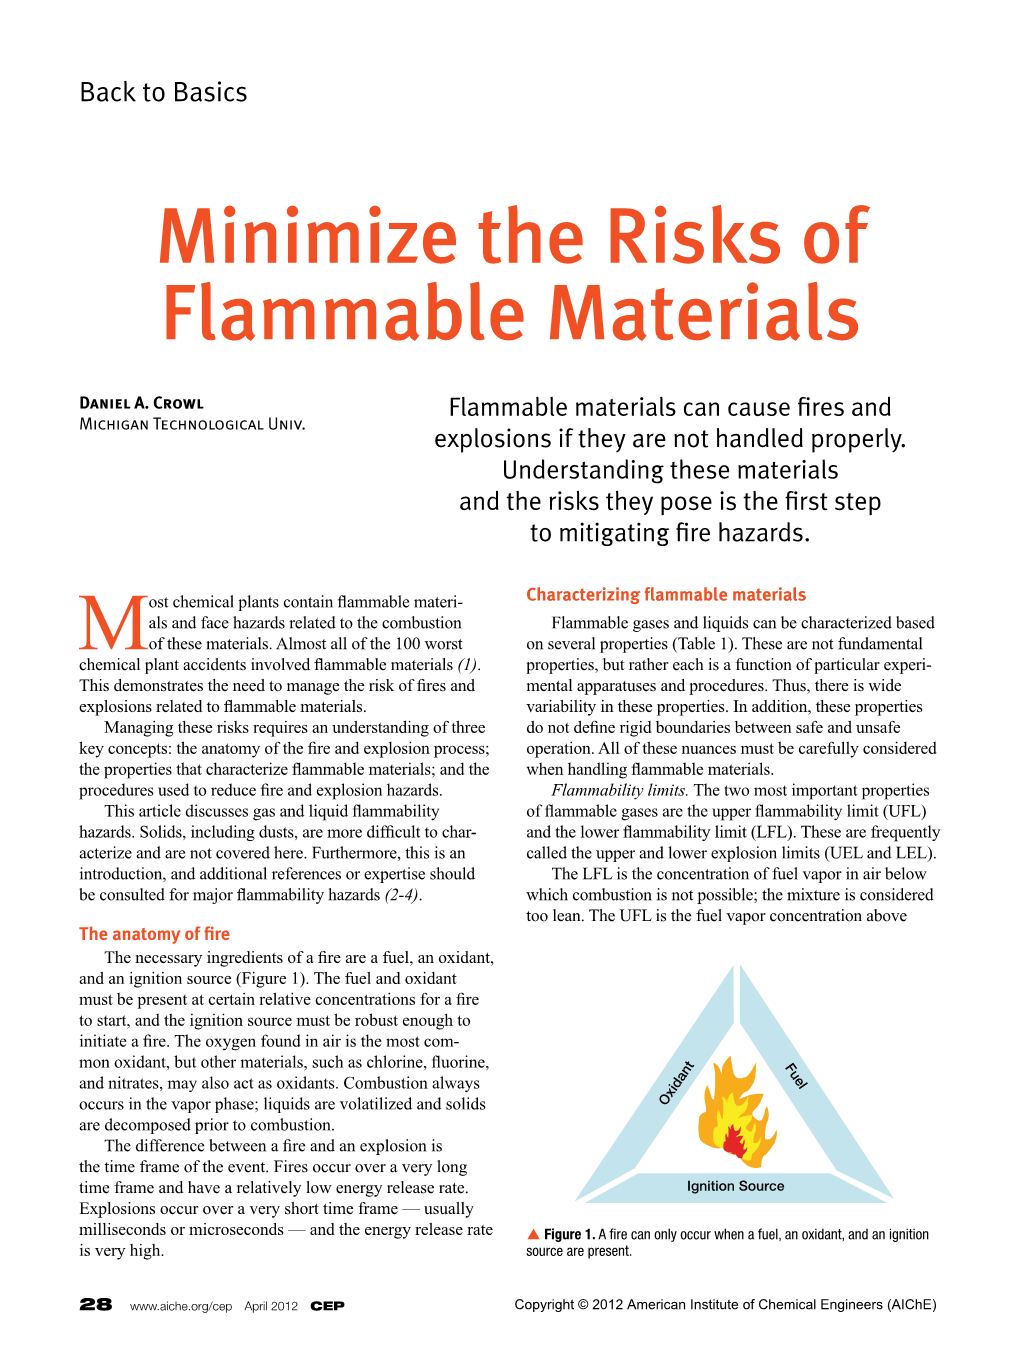 Minimize the Risks of Flammable Materials